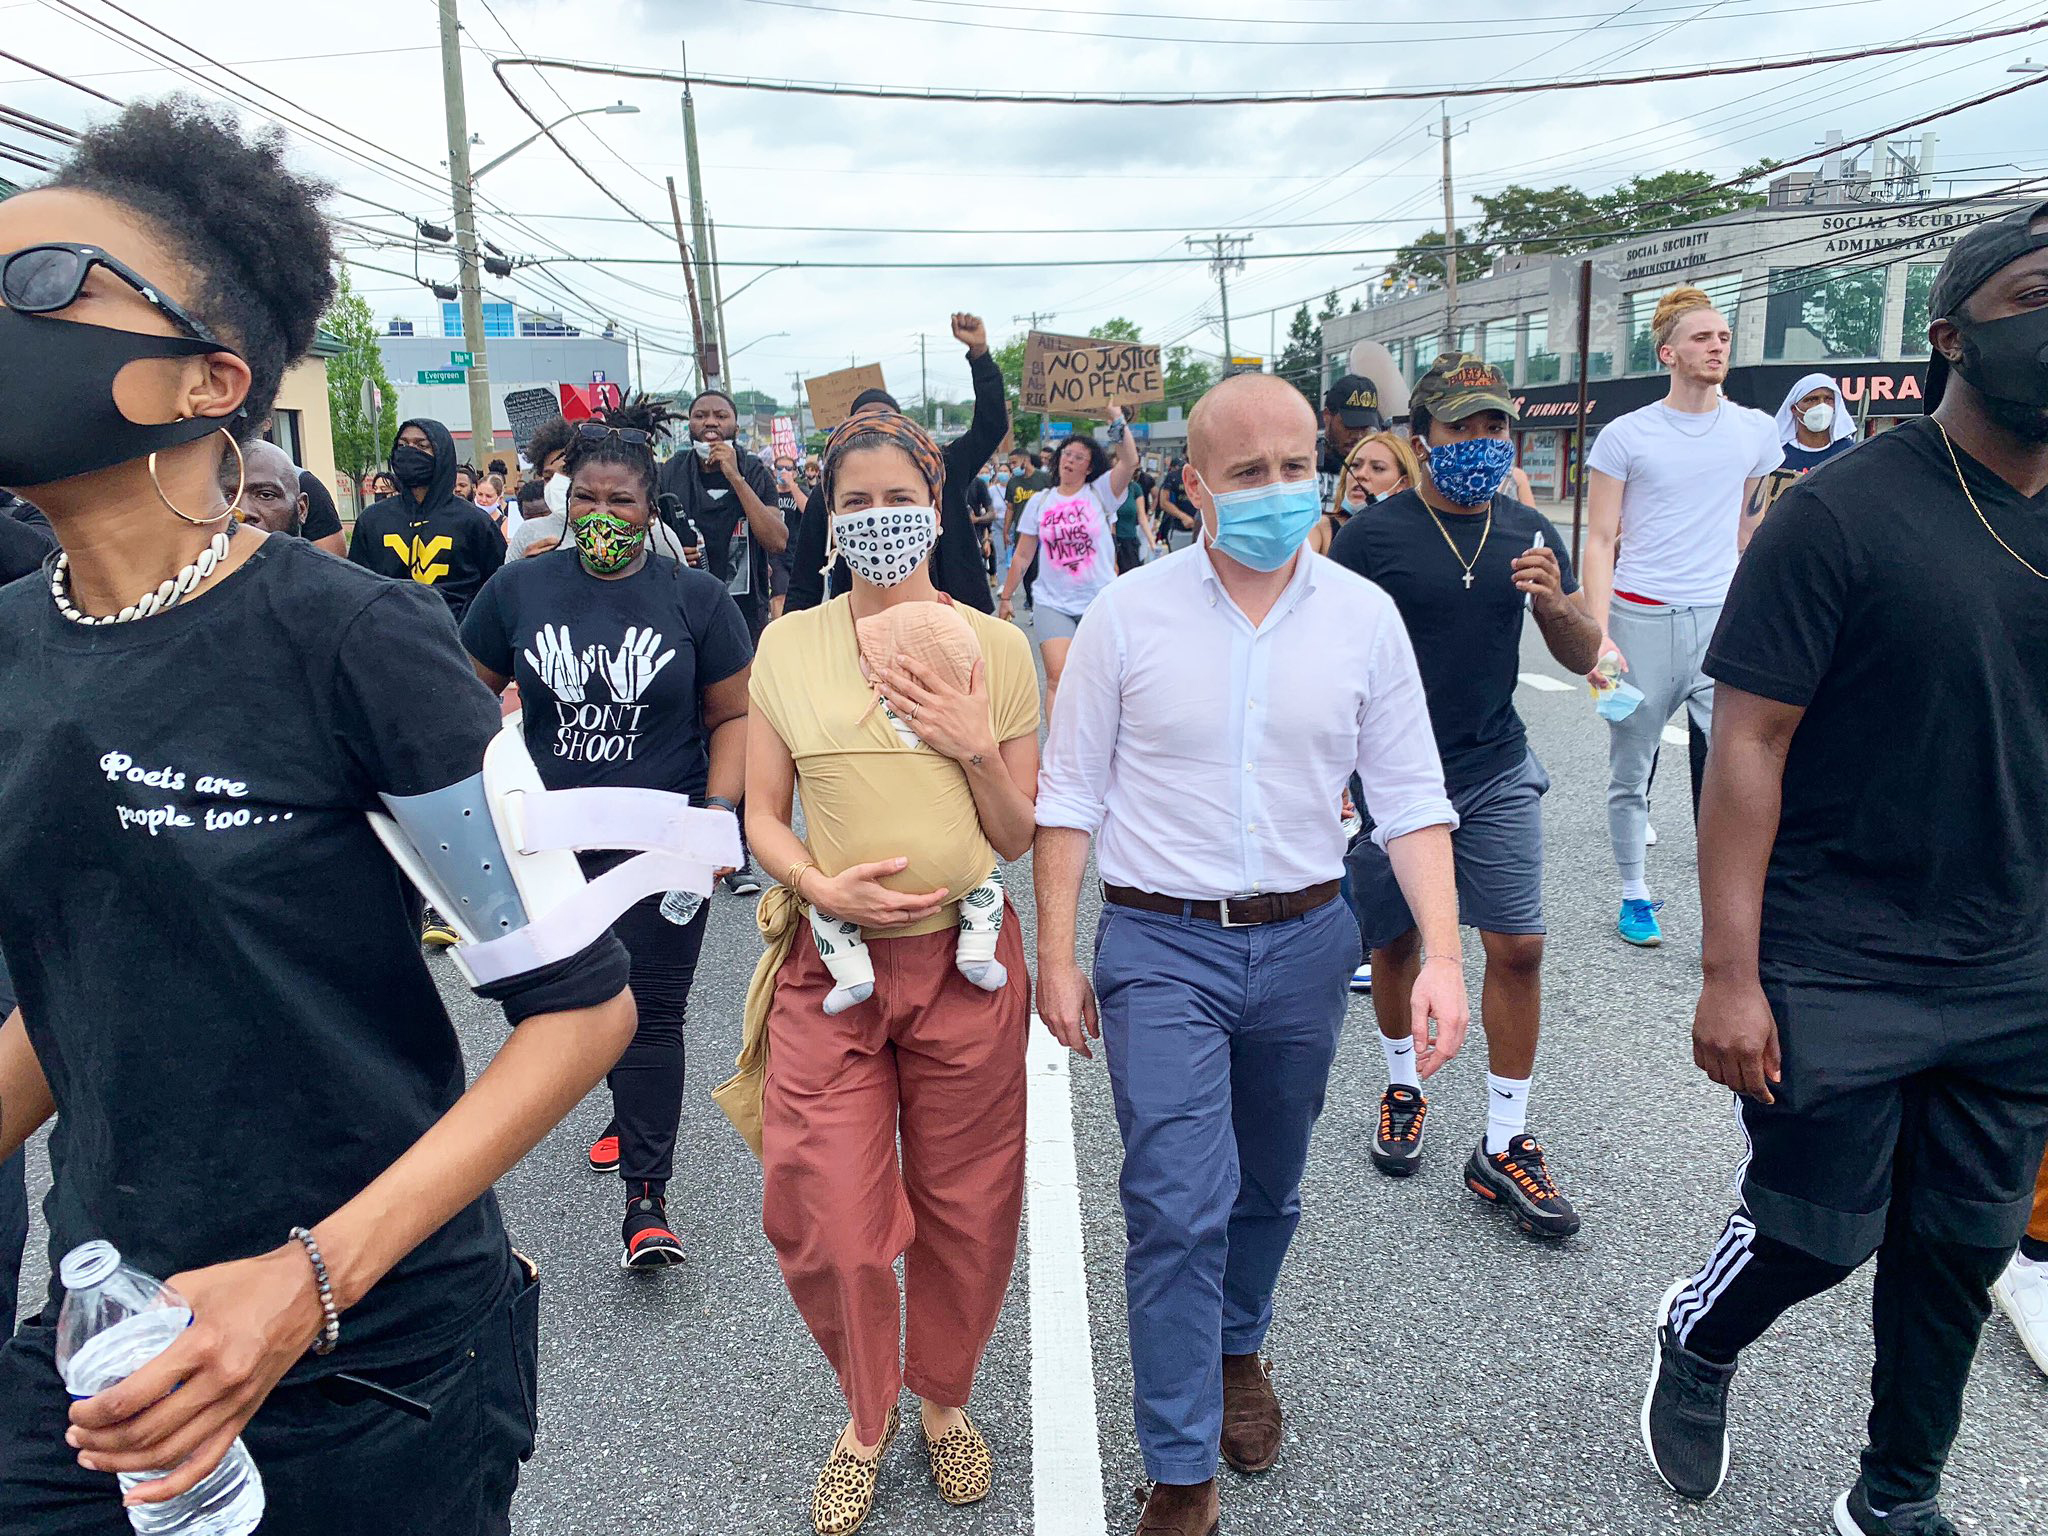 “Staten Island's youth are leading an incredibly powerful, peaceful movement for justice in honor of George Floyd, Breonna Taylor, and so many Black lives that have been lost due to senseless acts of violence. Leigh, Miles and I were proud to march with them today.” Max Rose (Courtesy @MaxRose4NY, Twitter)